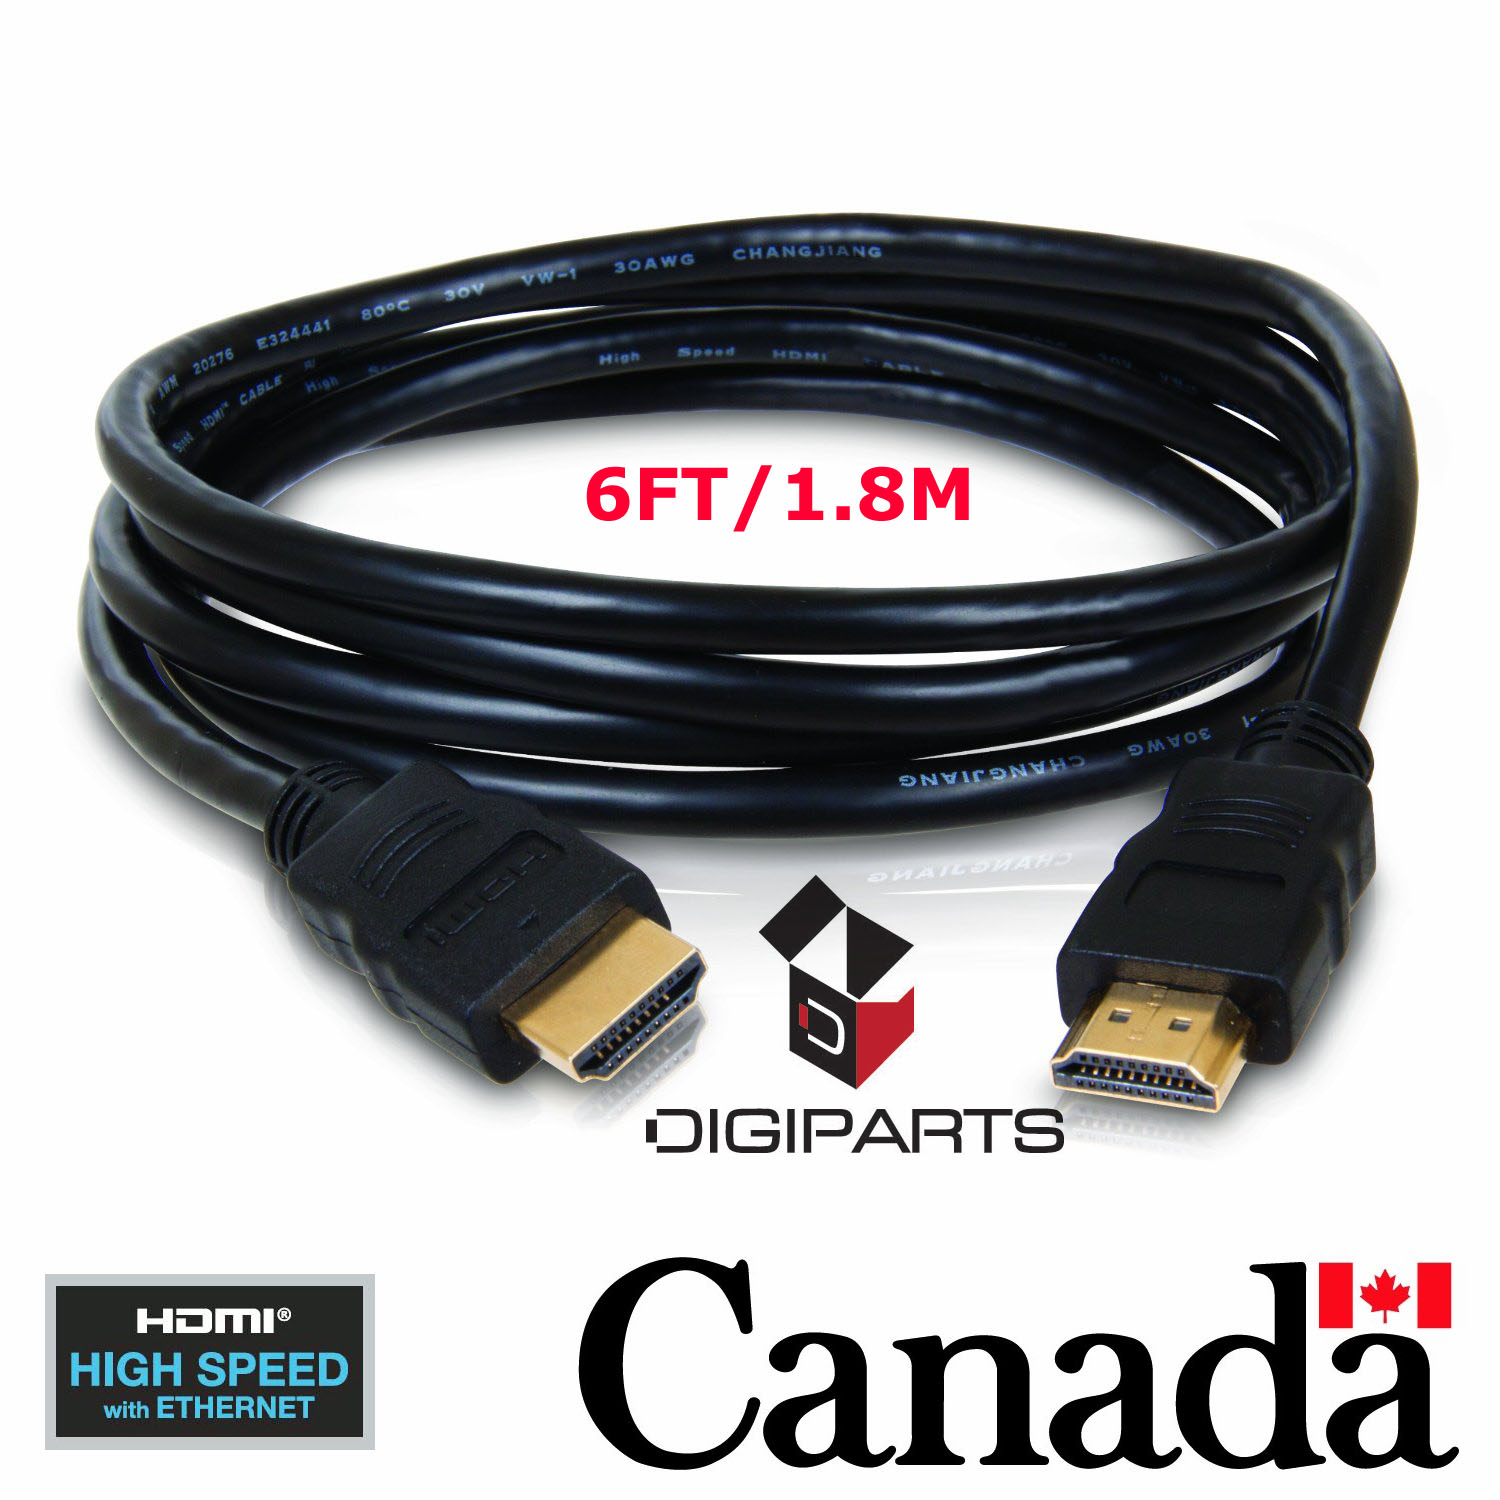 6 ft 1 8M High Speed Gold HDMI Cable V1 4 1080p 3D 6ft Feet Foot Ethernet